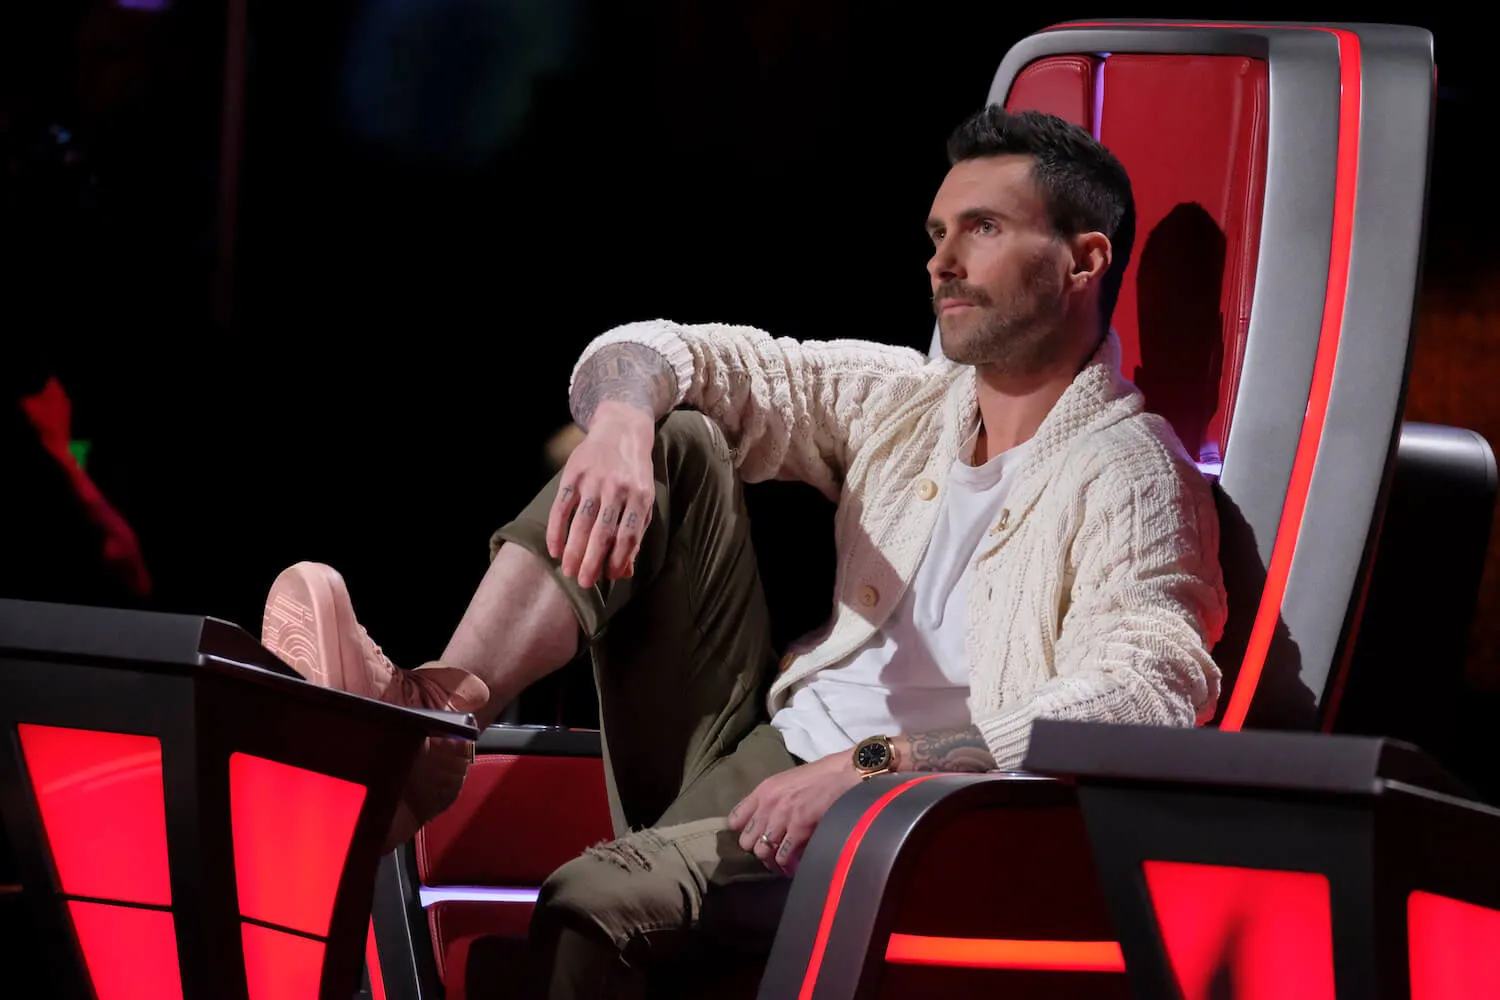 'The Voice' coach Adam Levine sitting in the red coaching chair with his leg up